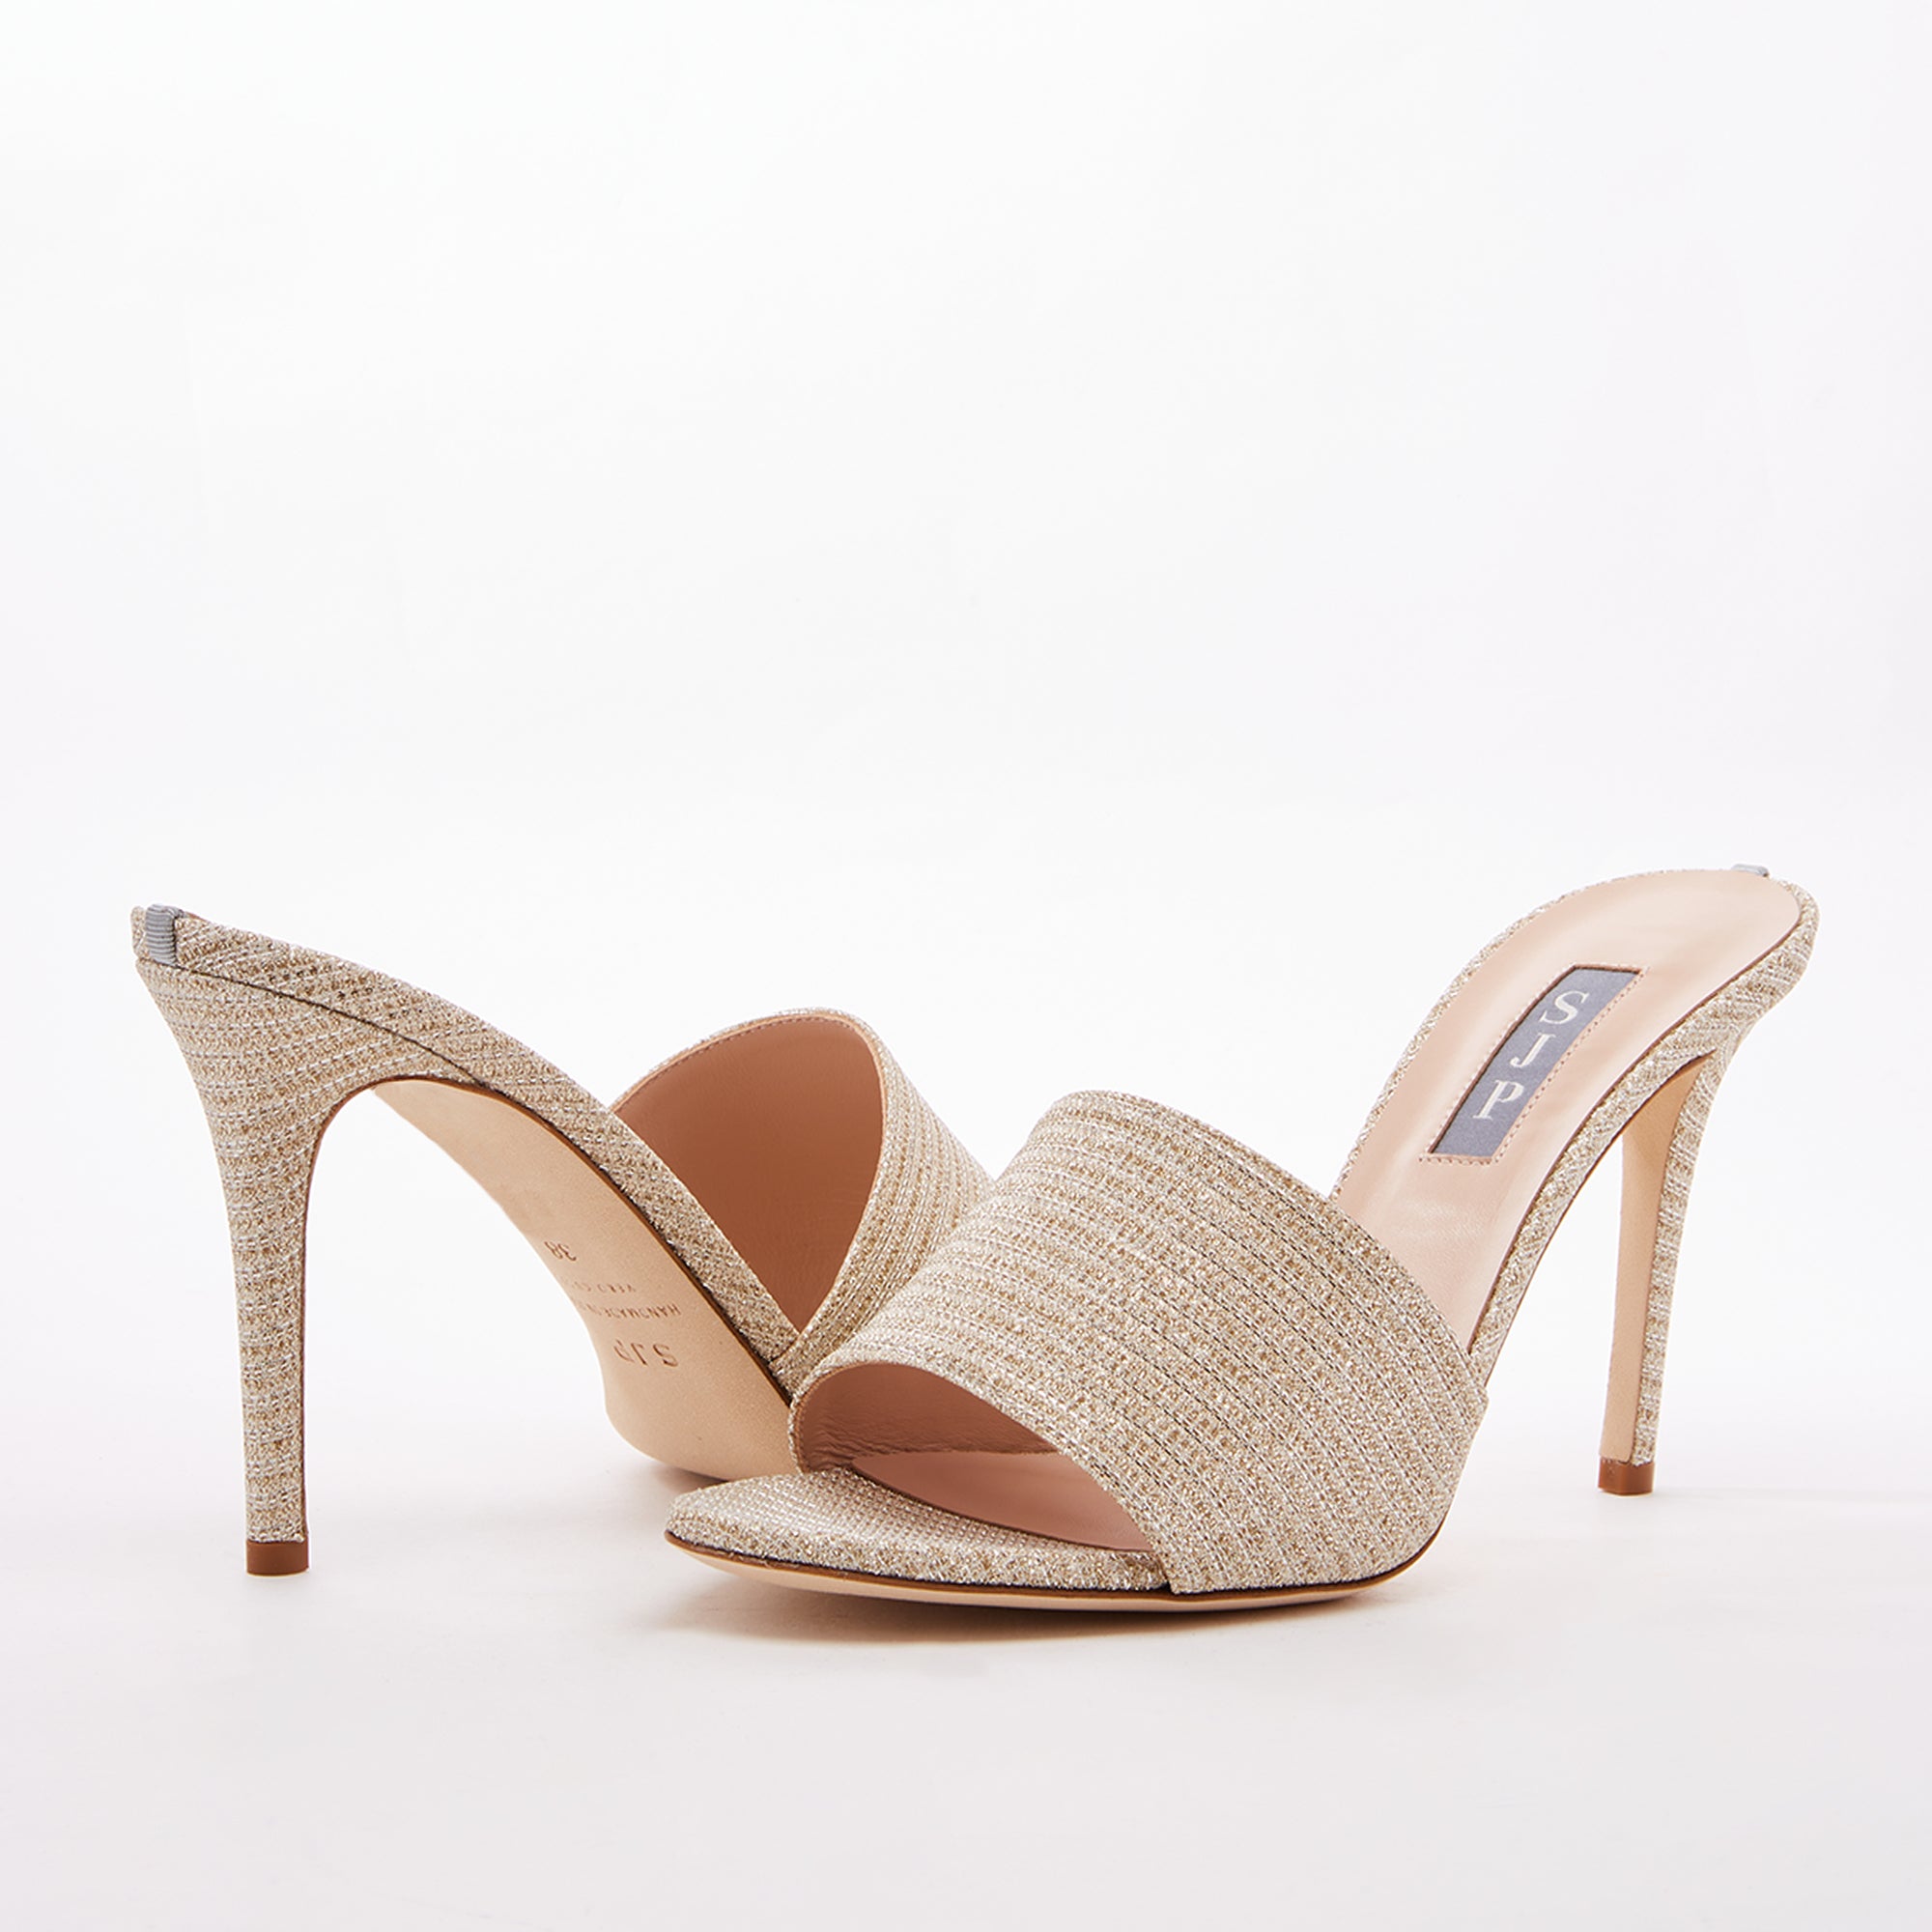 SJP by Sarah Jessica Parker Calico 90mm Gold Fabric Sandals